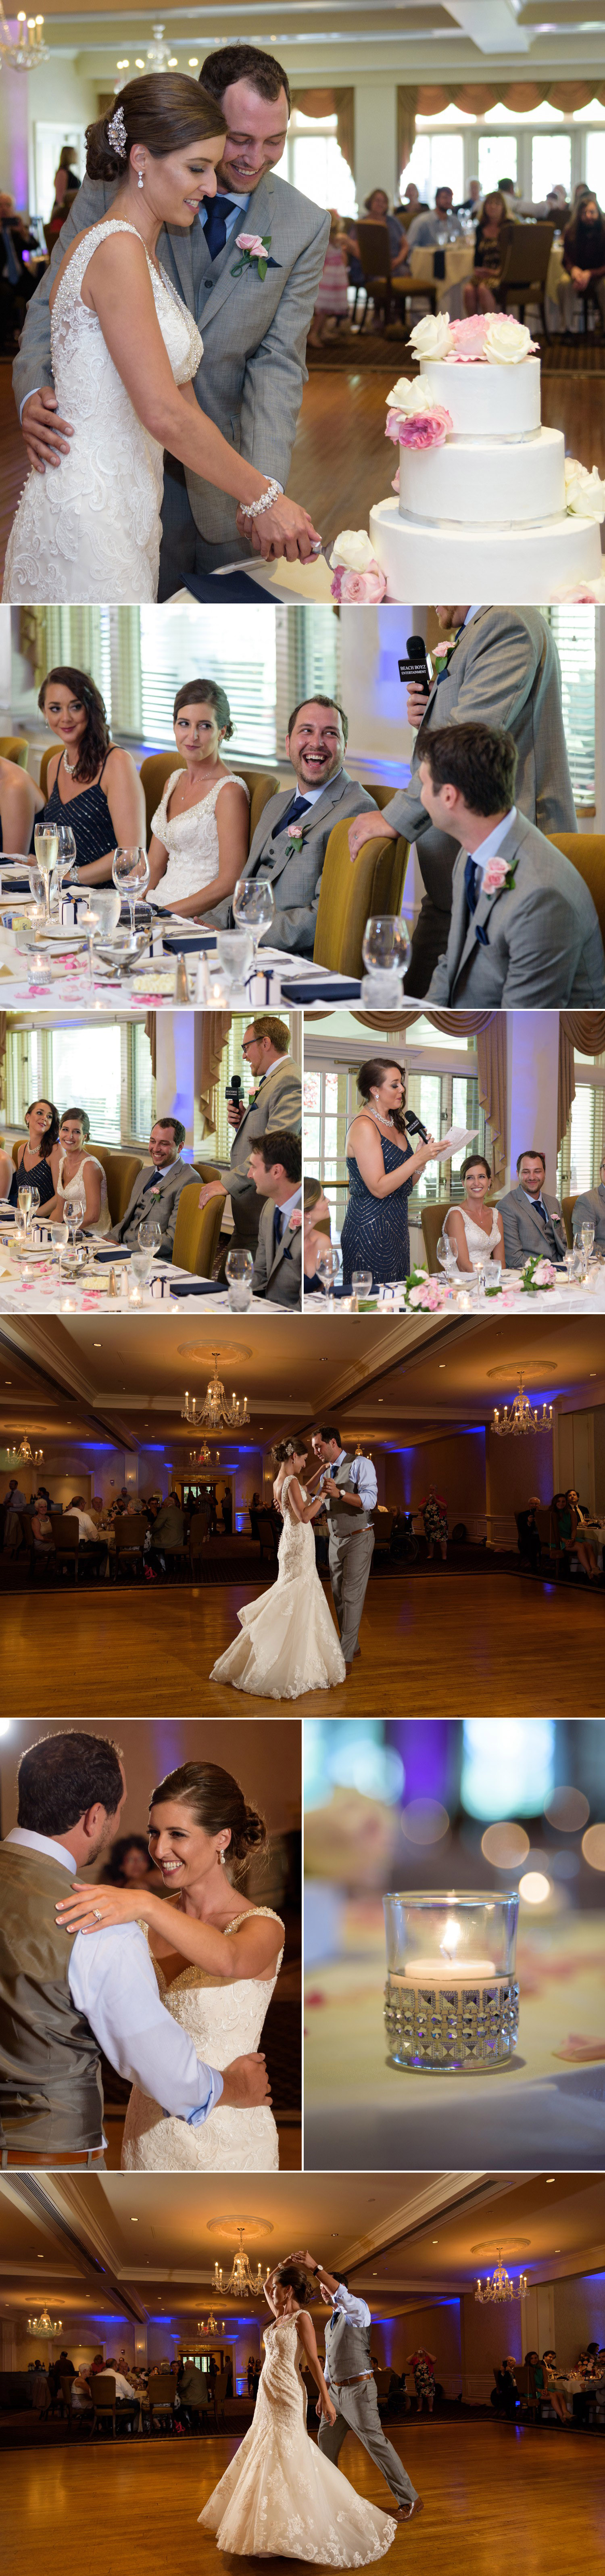 Shaker Heights Country Club Wedding